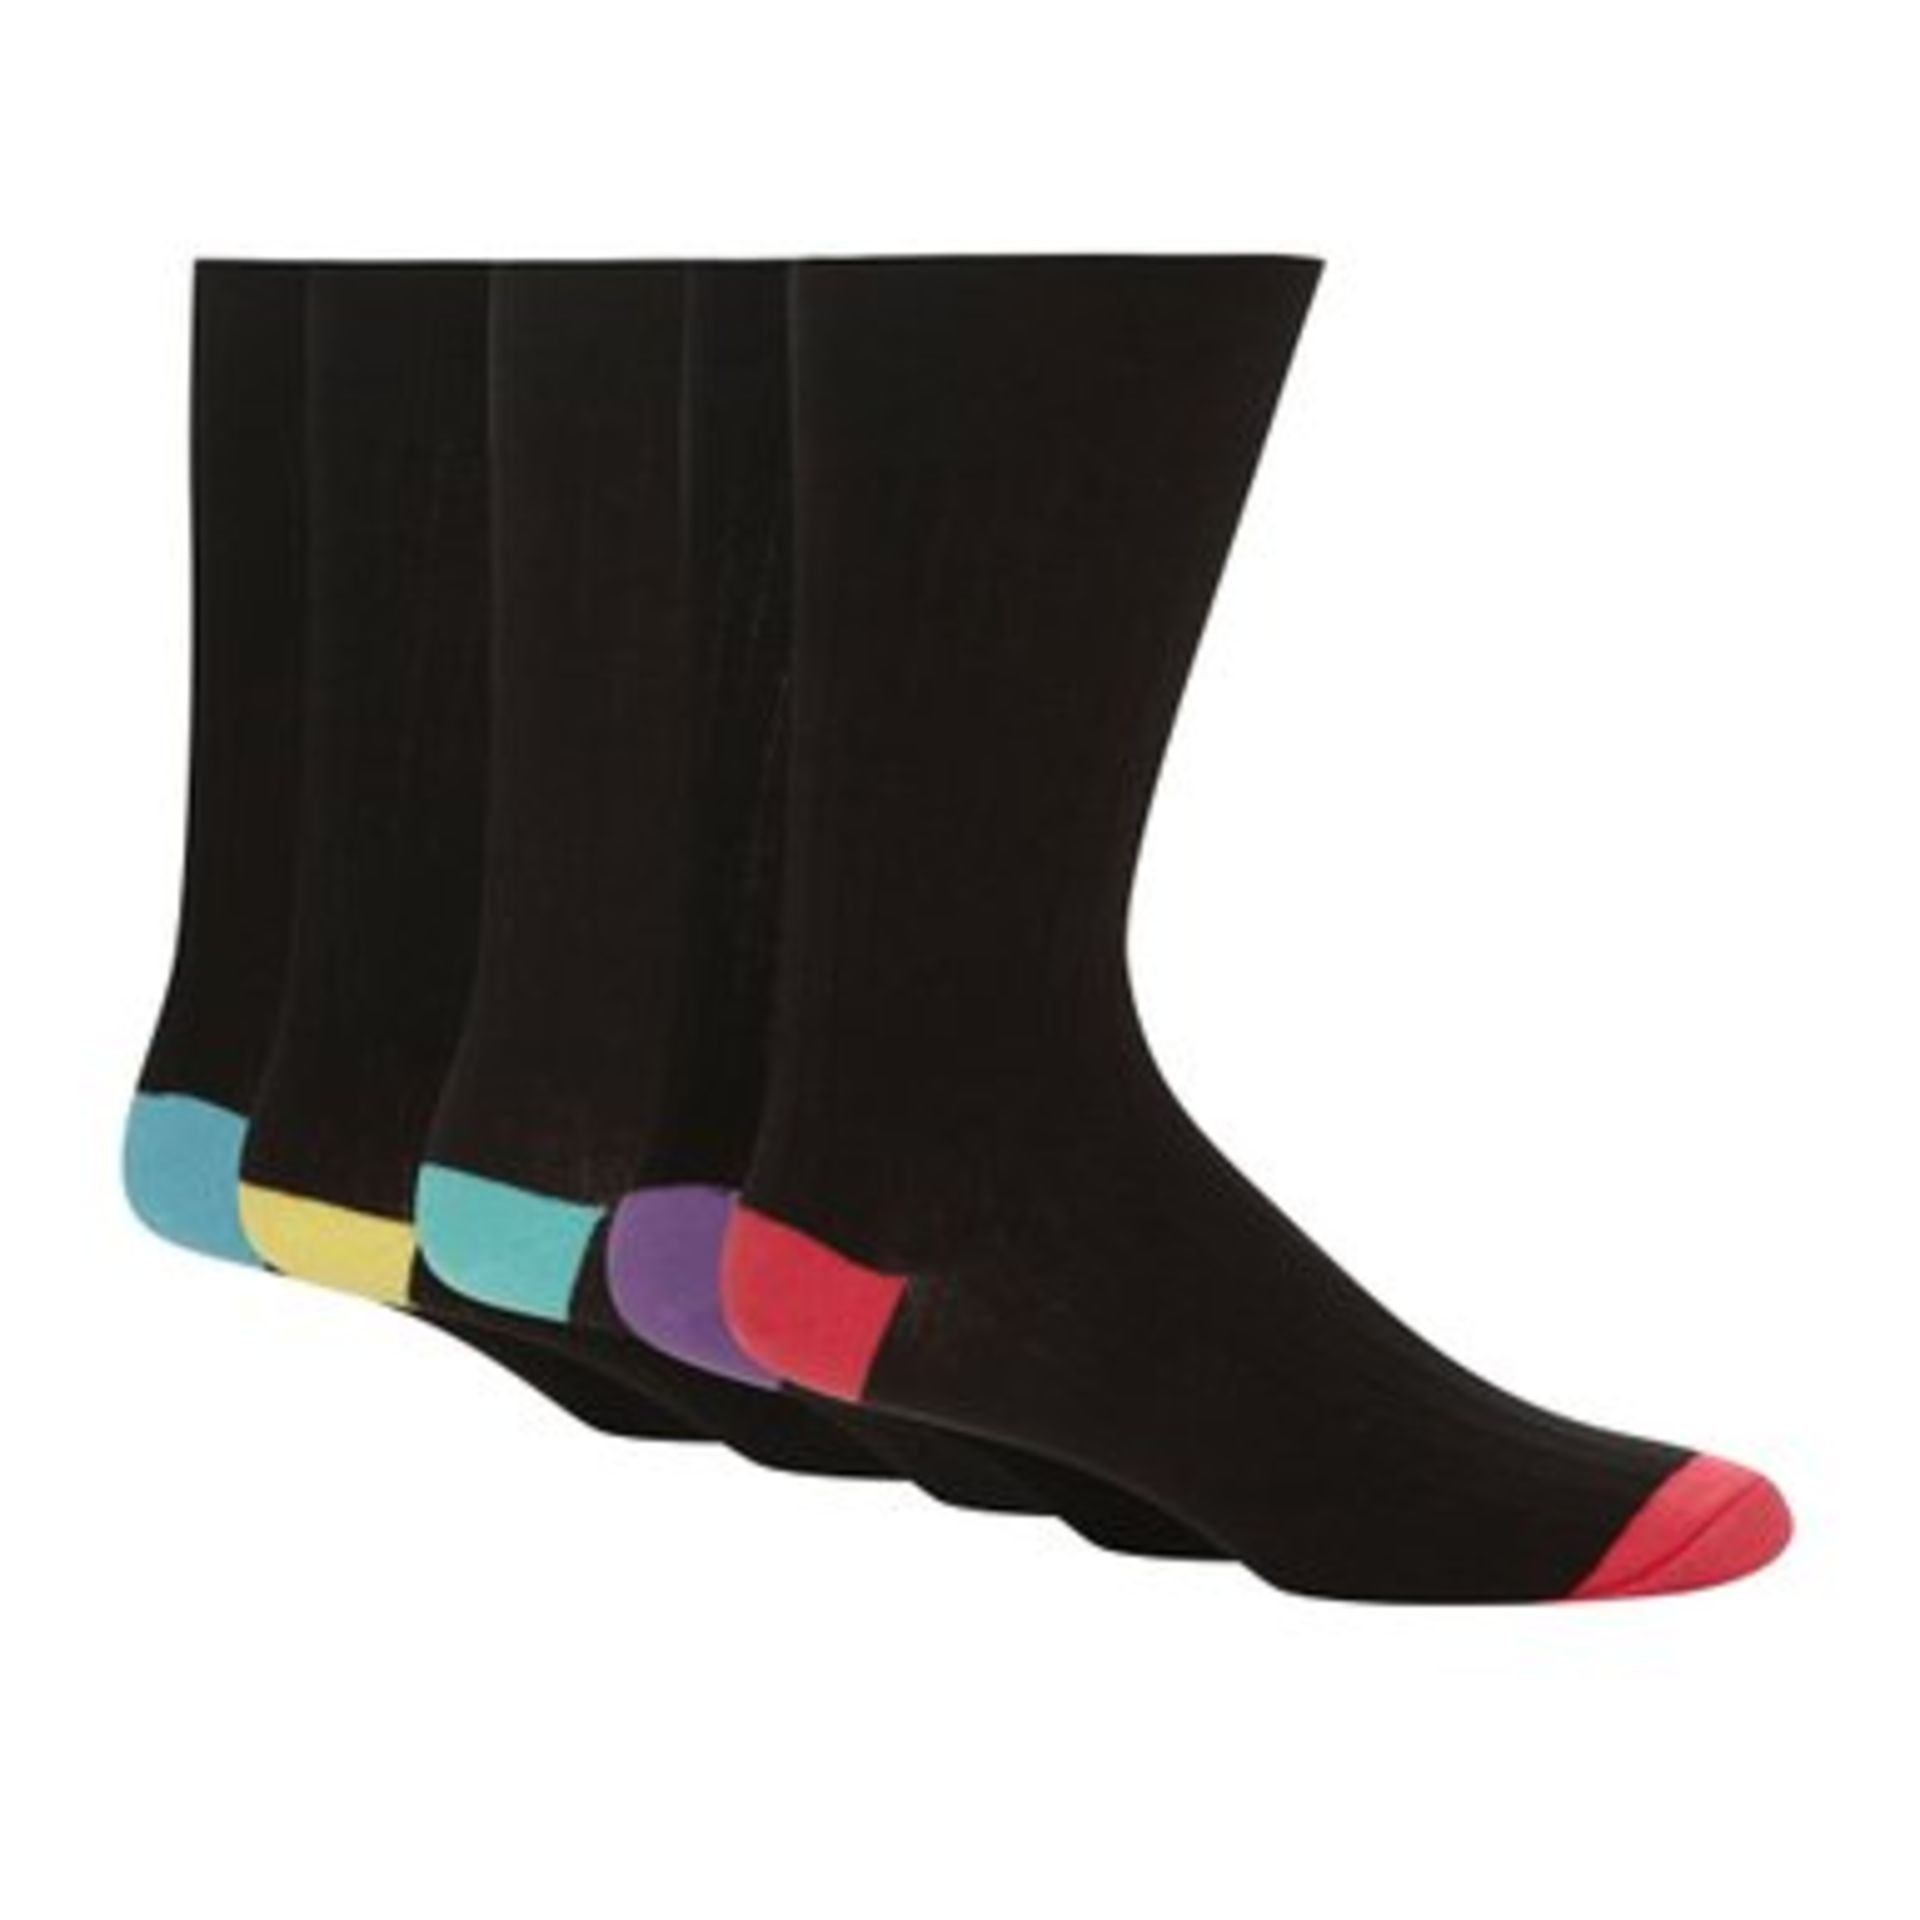 V Brand New A Lot Of Twelve Pairs Gents Socks Size 6-11 (Image is similar)